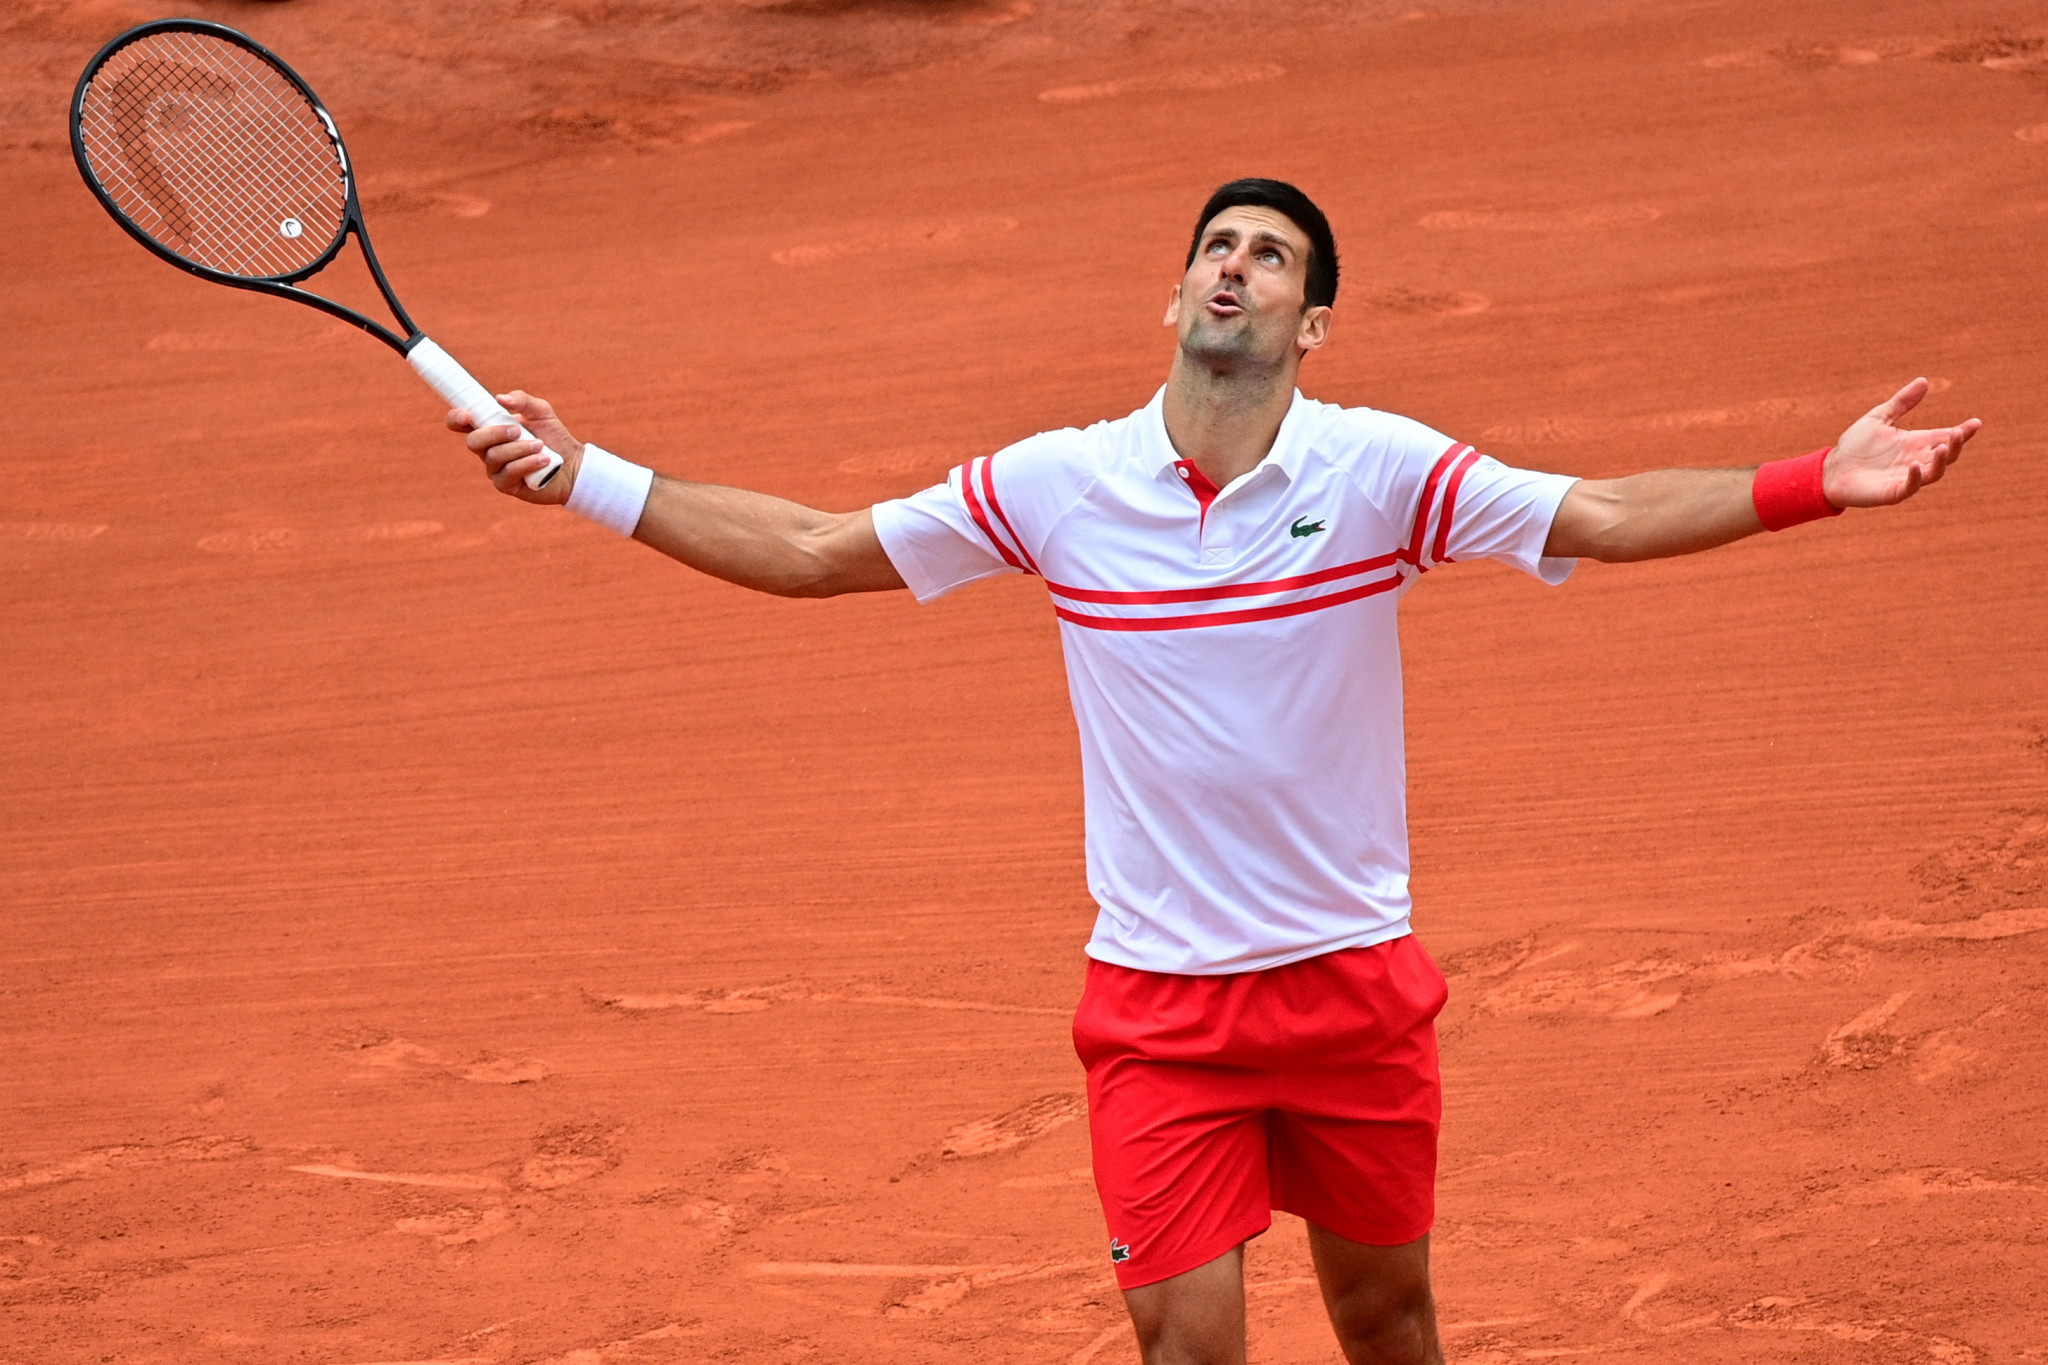 Djokovic survives scare to stage comeback in fourth round of French Open